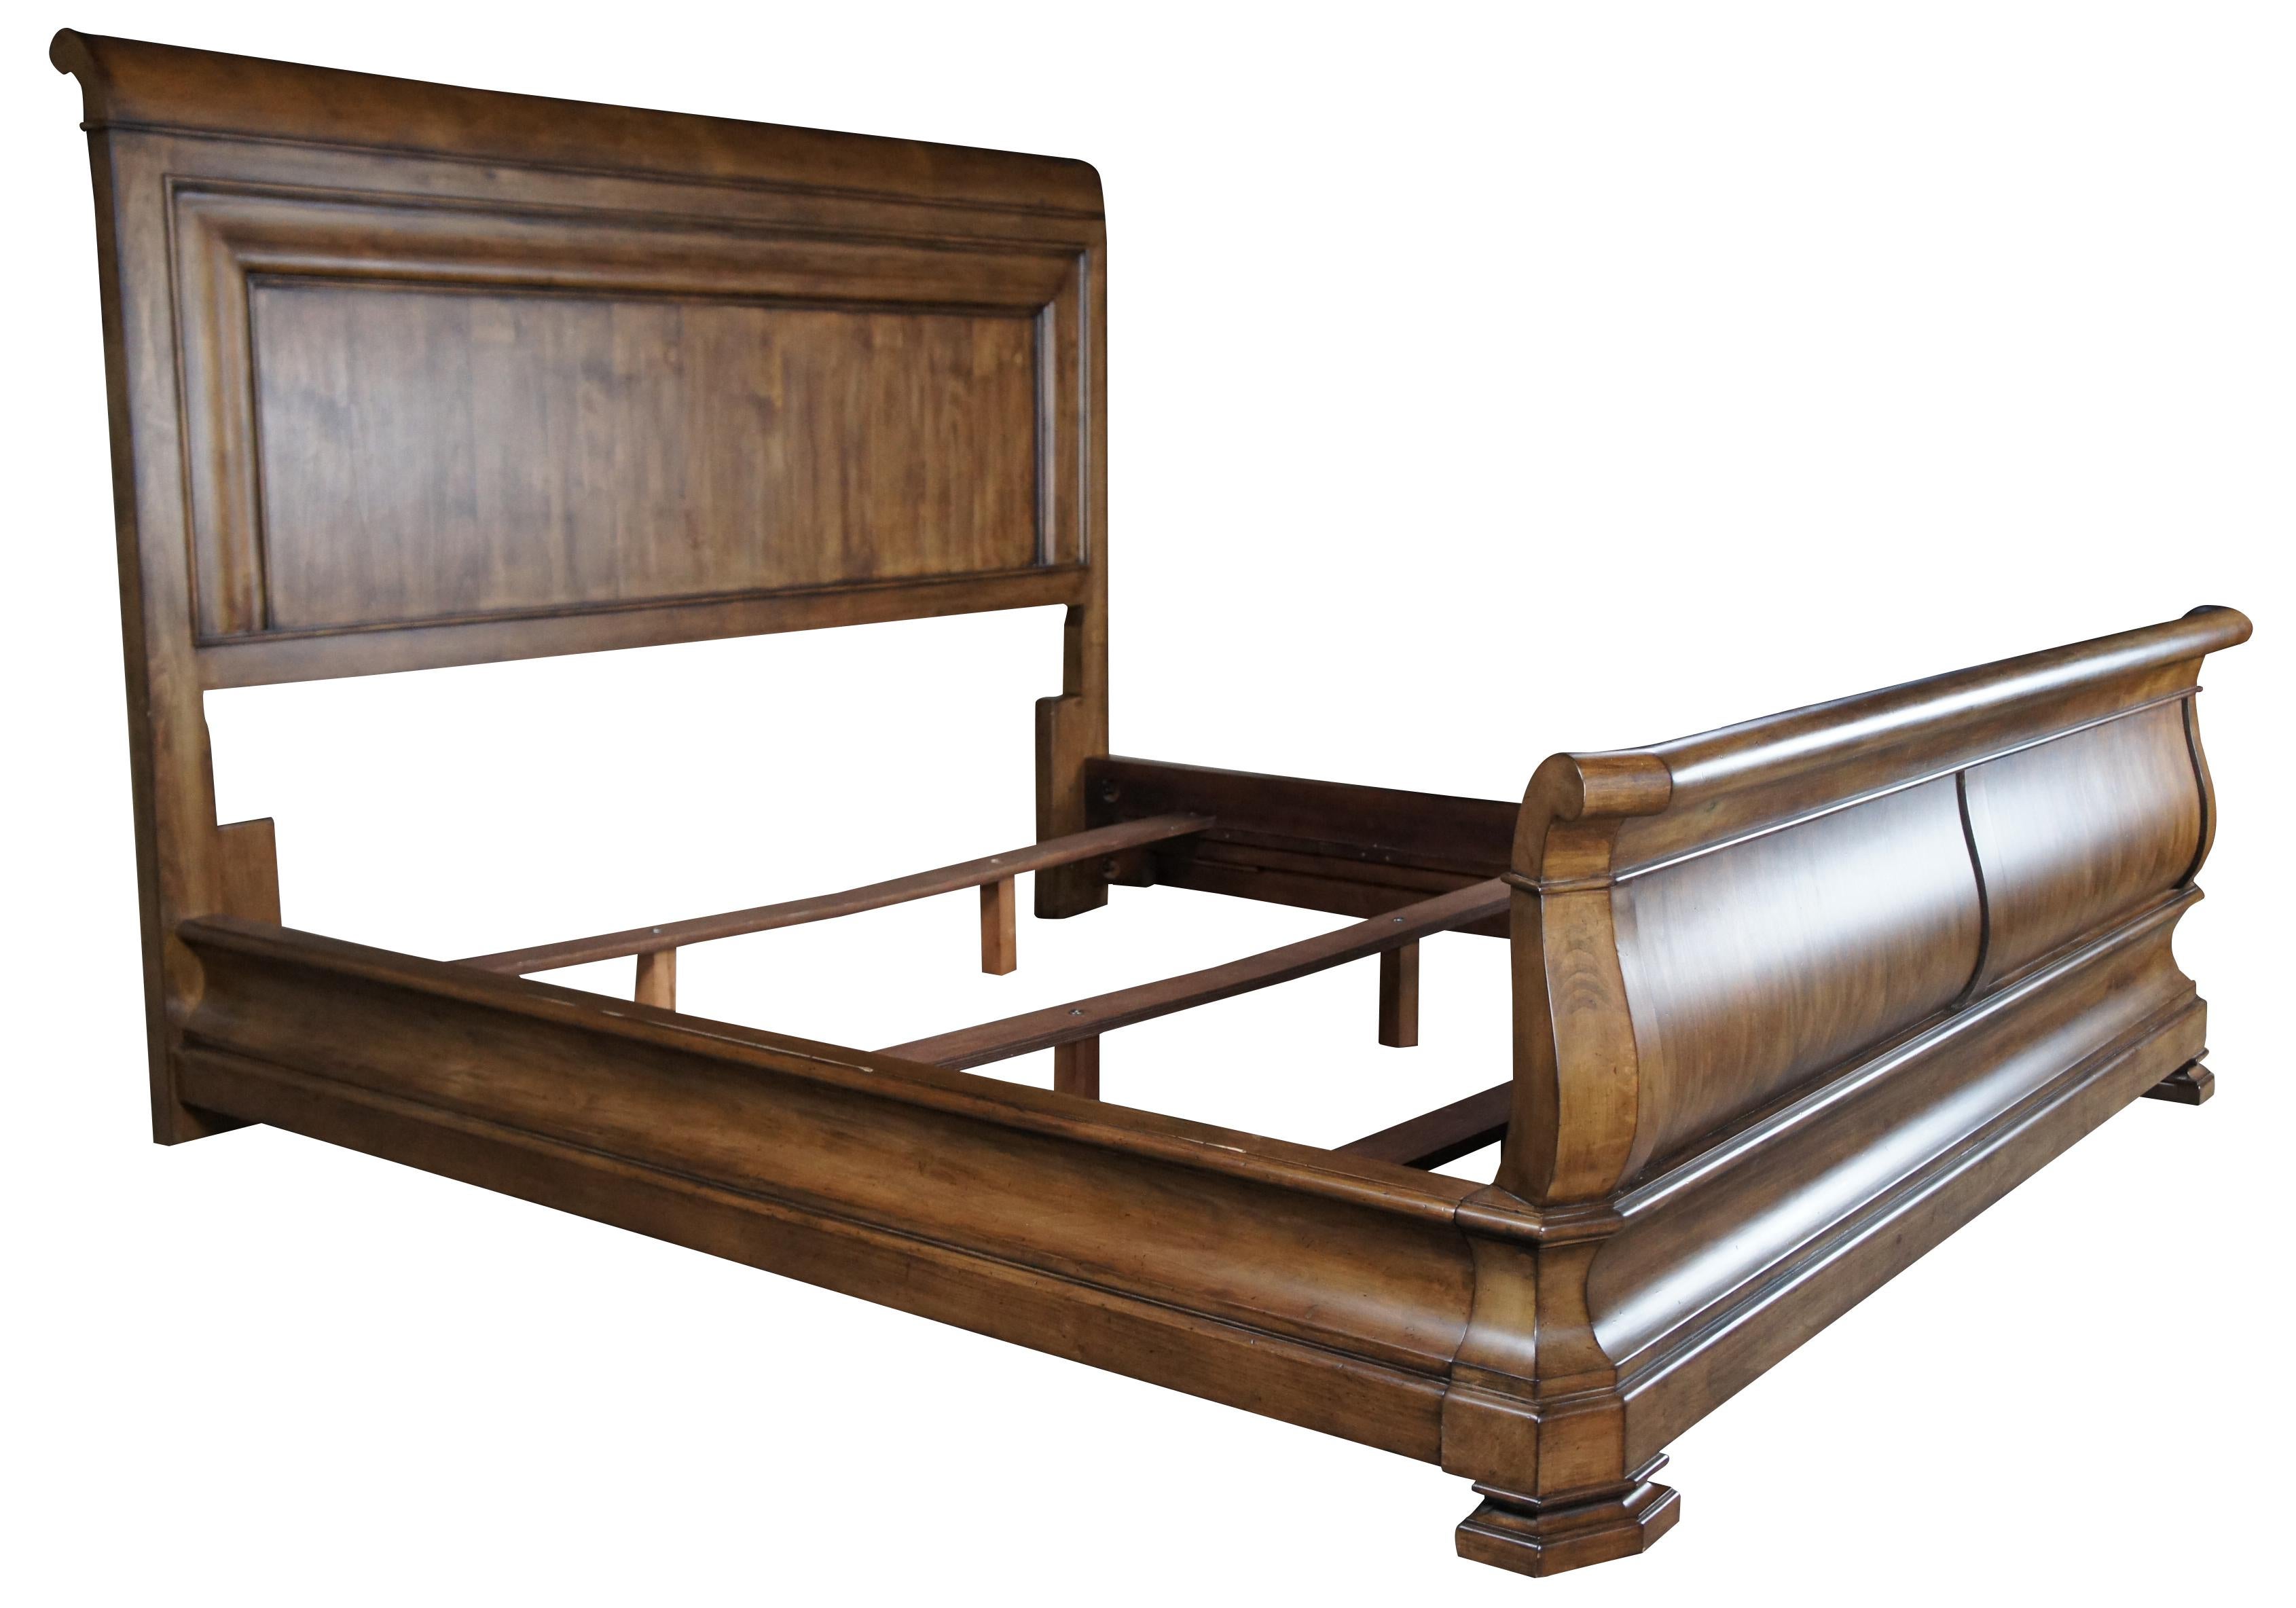 New Lou Louie P's Sleigh bed by Pennsylvania House & Universal. Drawing inspiration from Louis Phillipe styling. Crafted of solid alder in a lightly distressed, distinctly brown finish with graceful lines and modern sensibility. Features nine